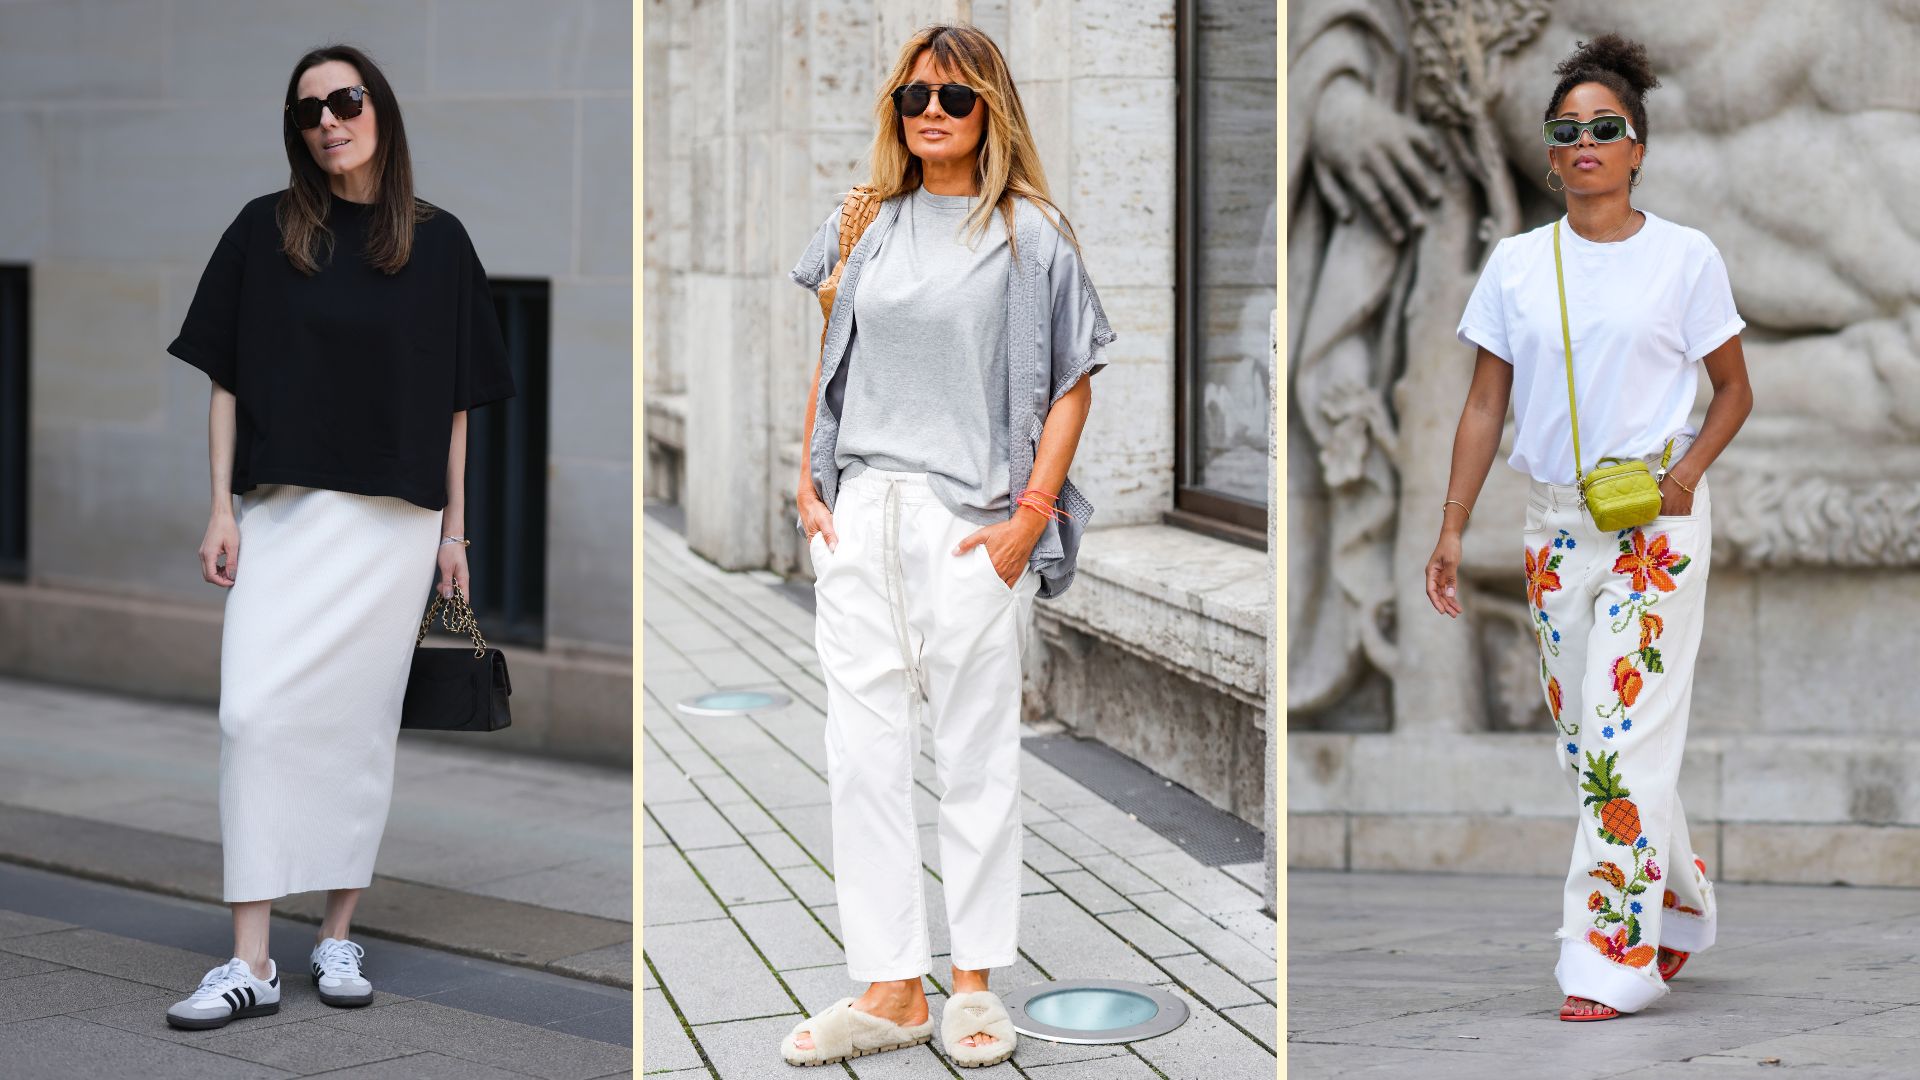 How to style oversized t-shirts to get the most out of this basic